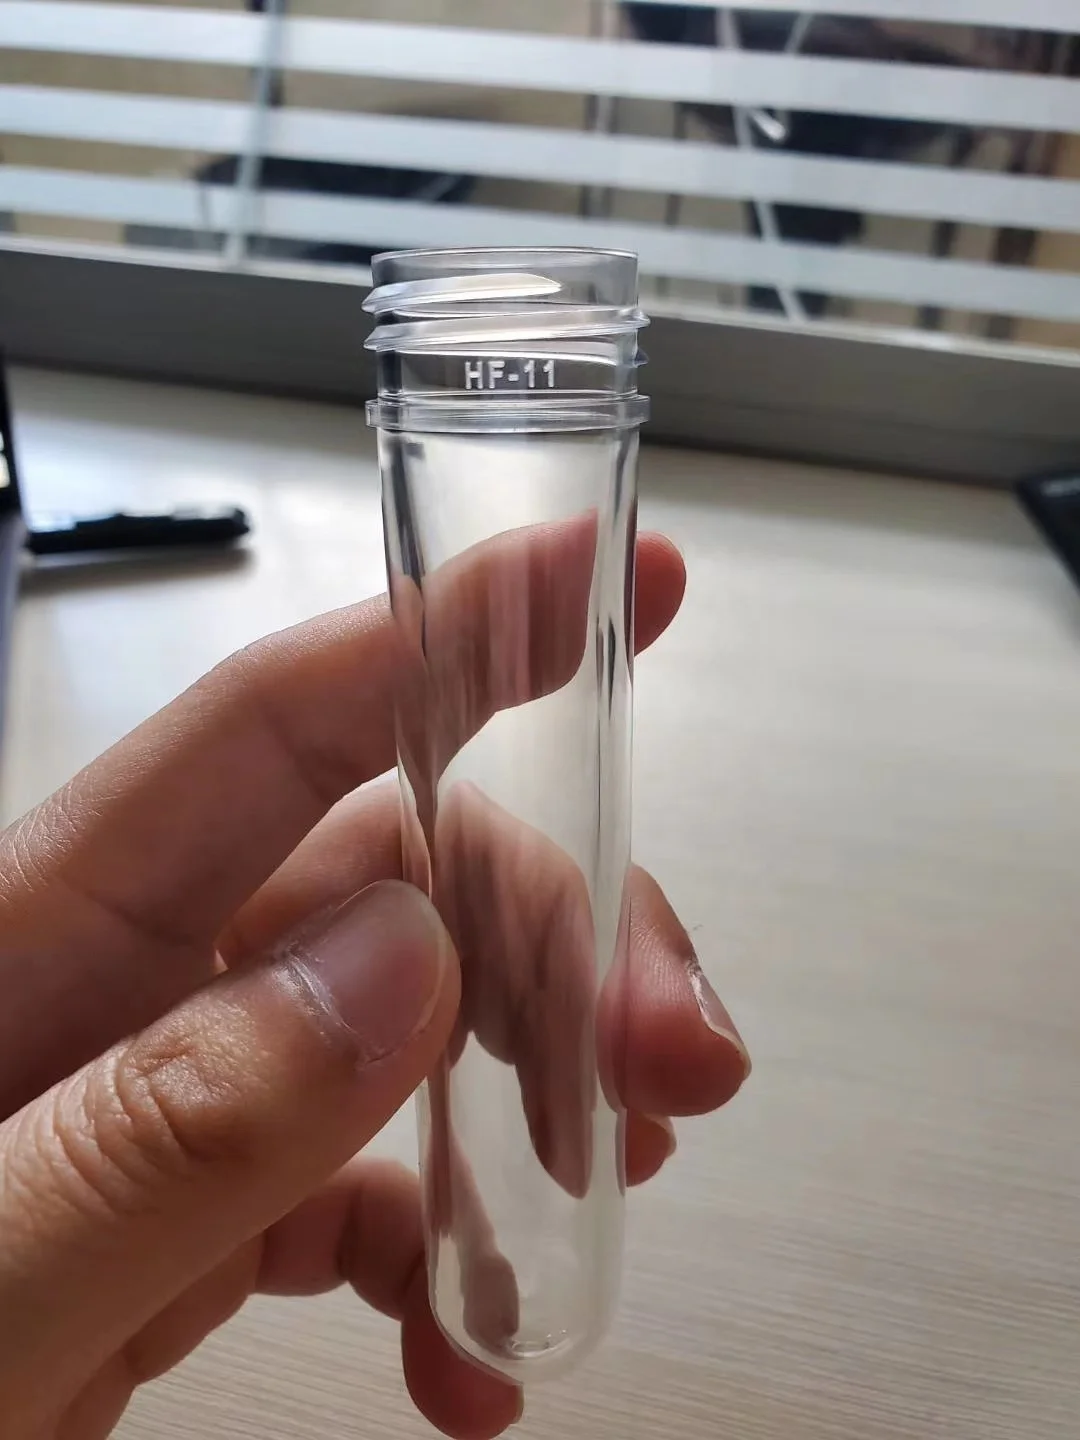 20mm 8g 10g 12g clear PET preform for  cosmetic bottles